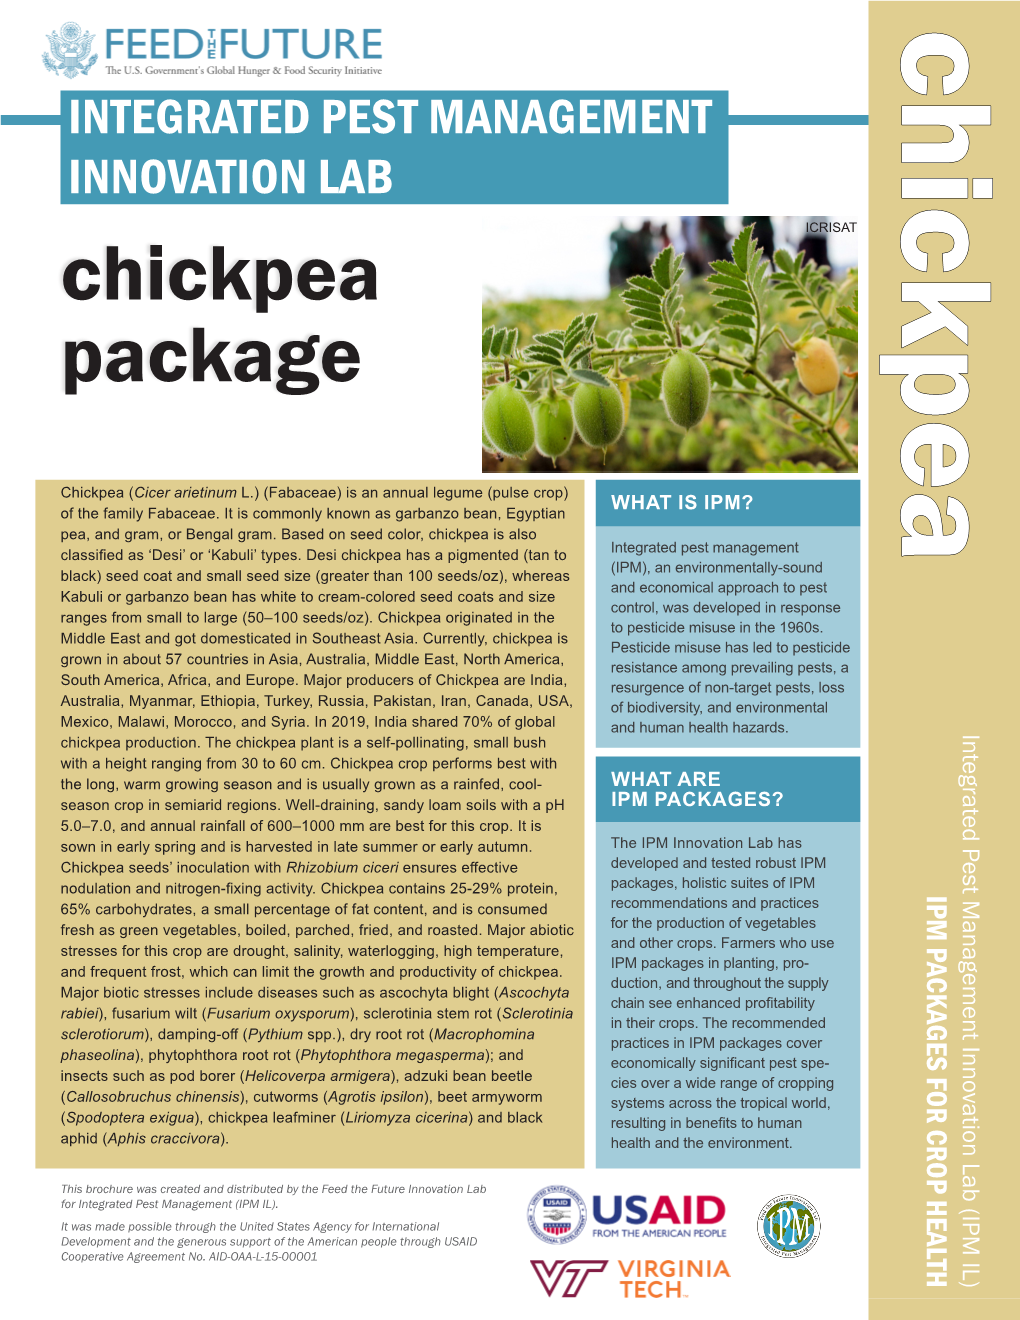 Chickpea Package